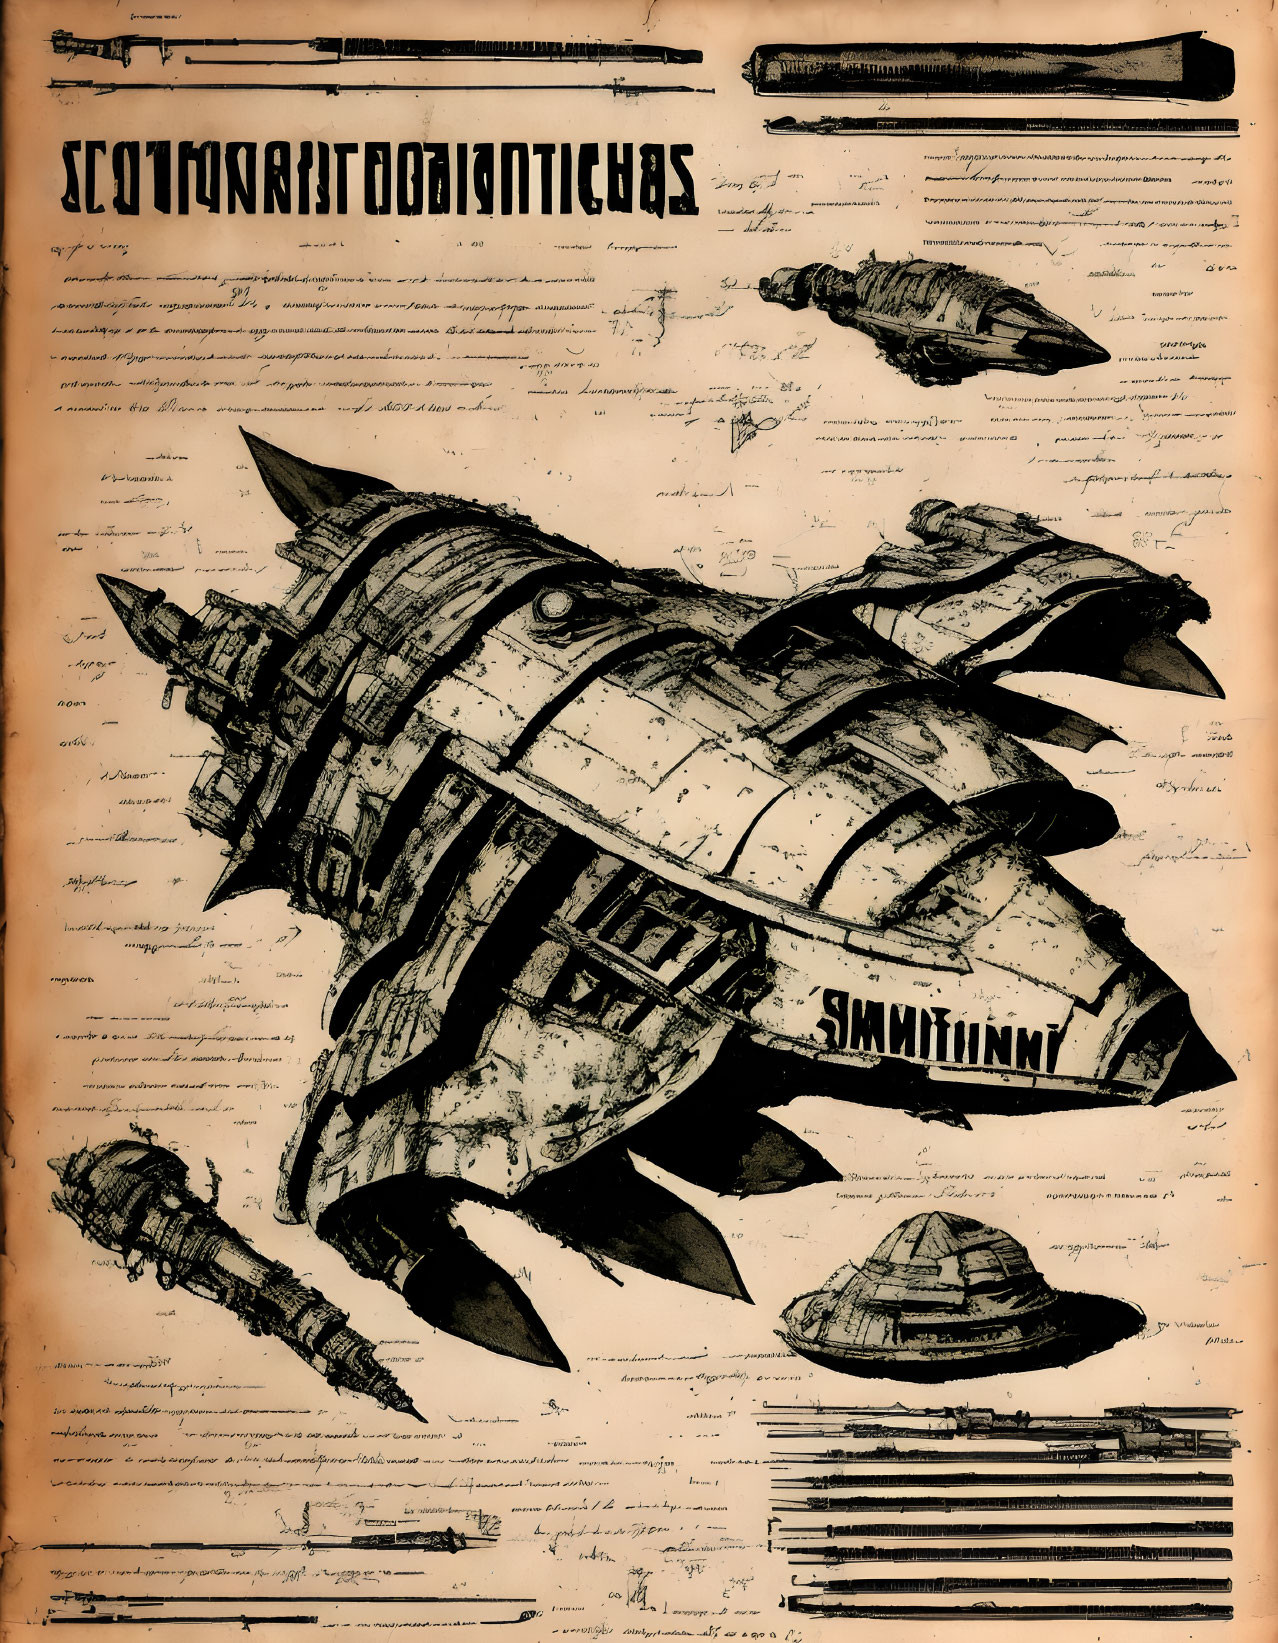 Vintage-style spacecraft designs with annotations - reminiscent of early sci-fi blueprints